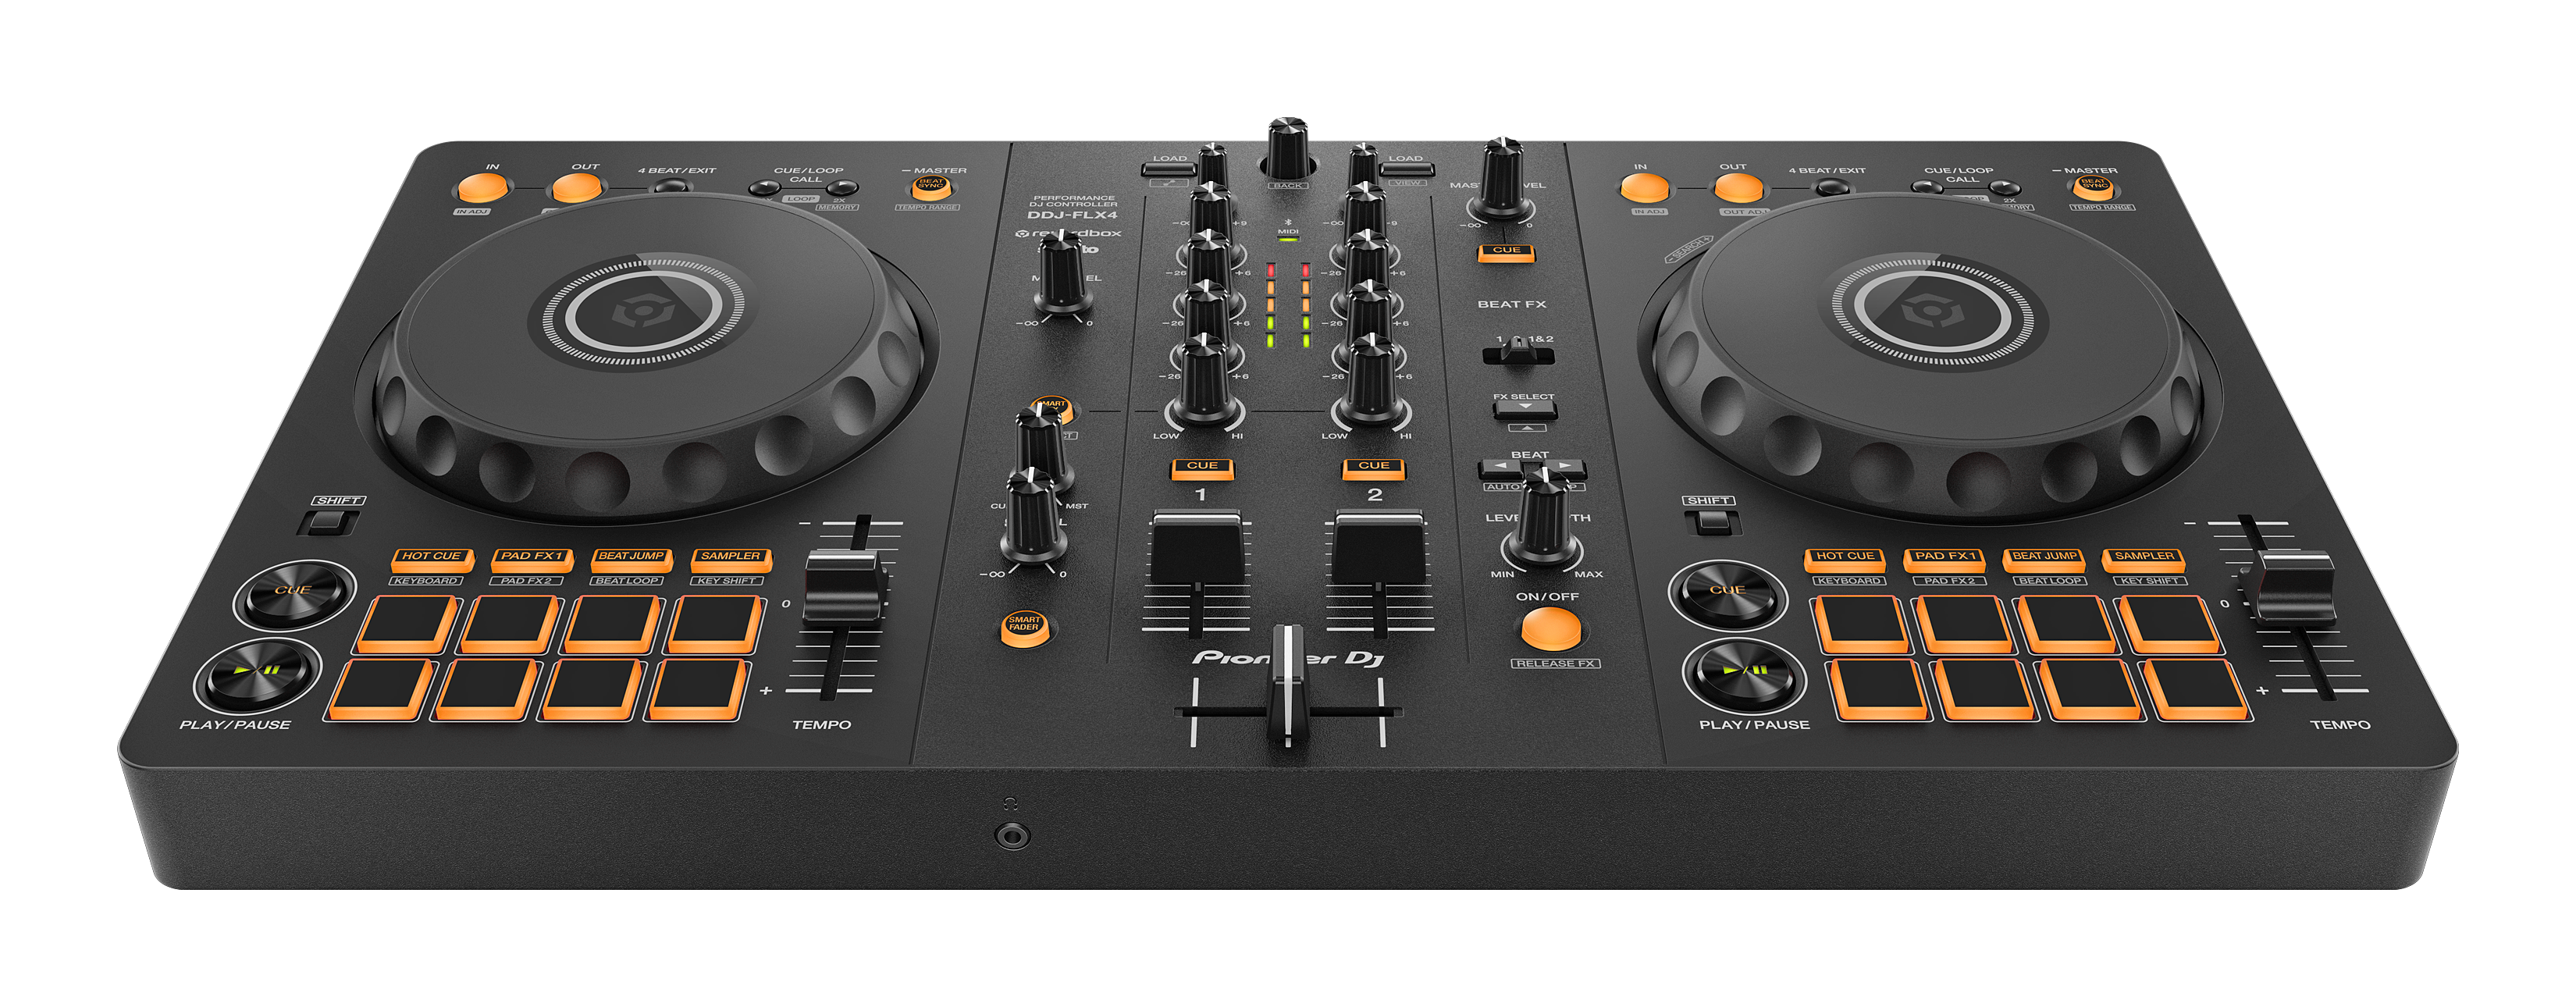 pioneer ddj 400, pioneer ddj 400 Suppliers and Manufacturers at